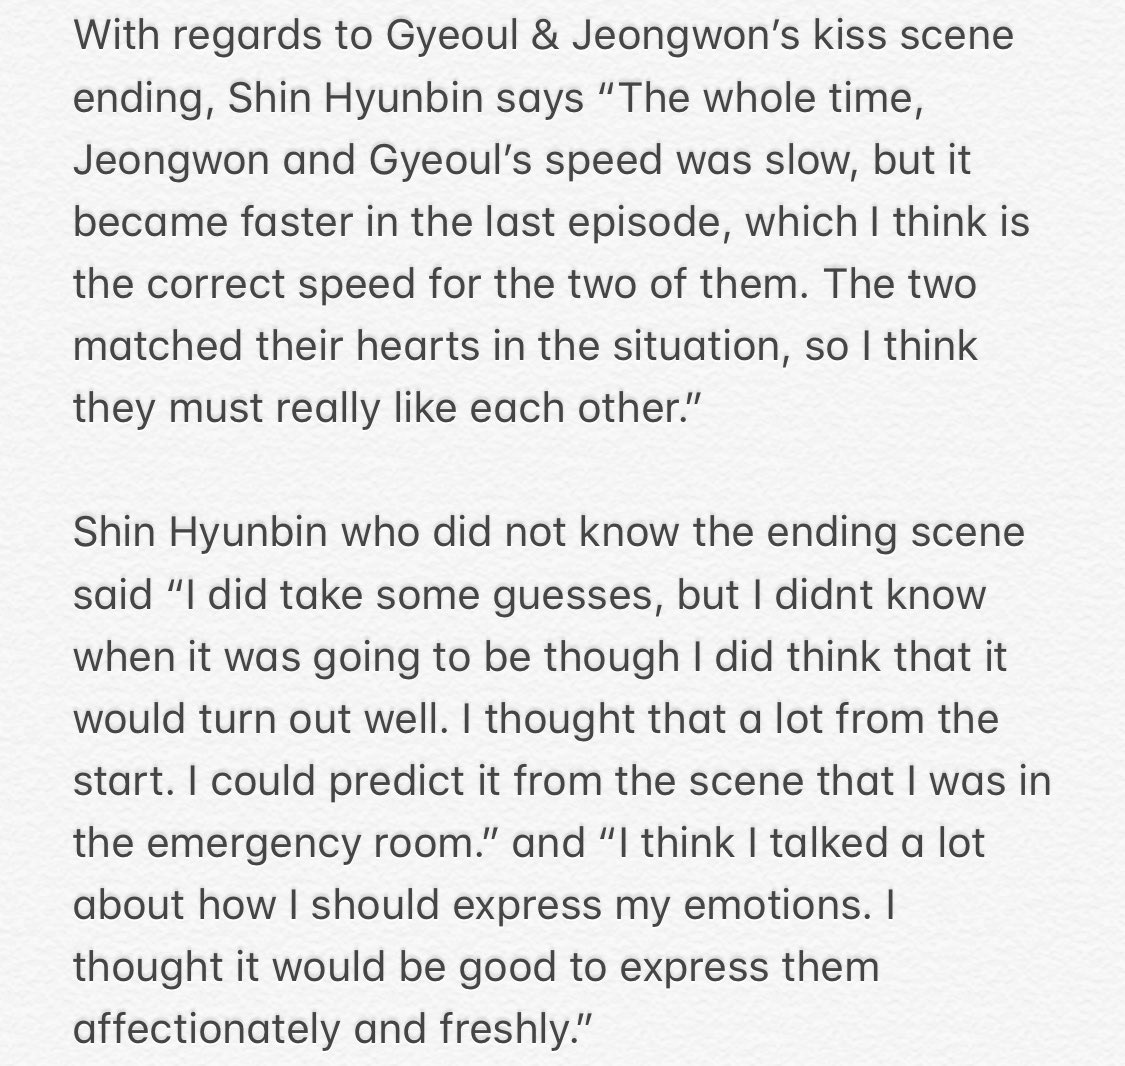 [ENG TRANS]Shin Hyunbin’s interview: article ‘Shin Hyunbin upporting Uju-Mone couple, her favourite stock’Part 1 - mostly talking about winter garden, and her having crushes in real life https://n.news.naver.com/entertain/article/609/0000284016